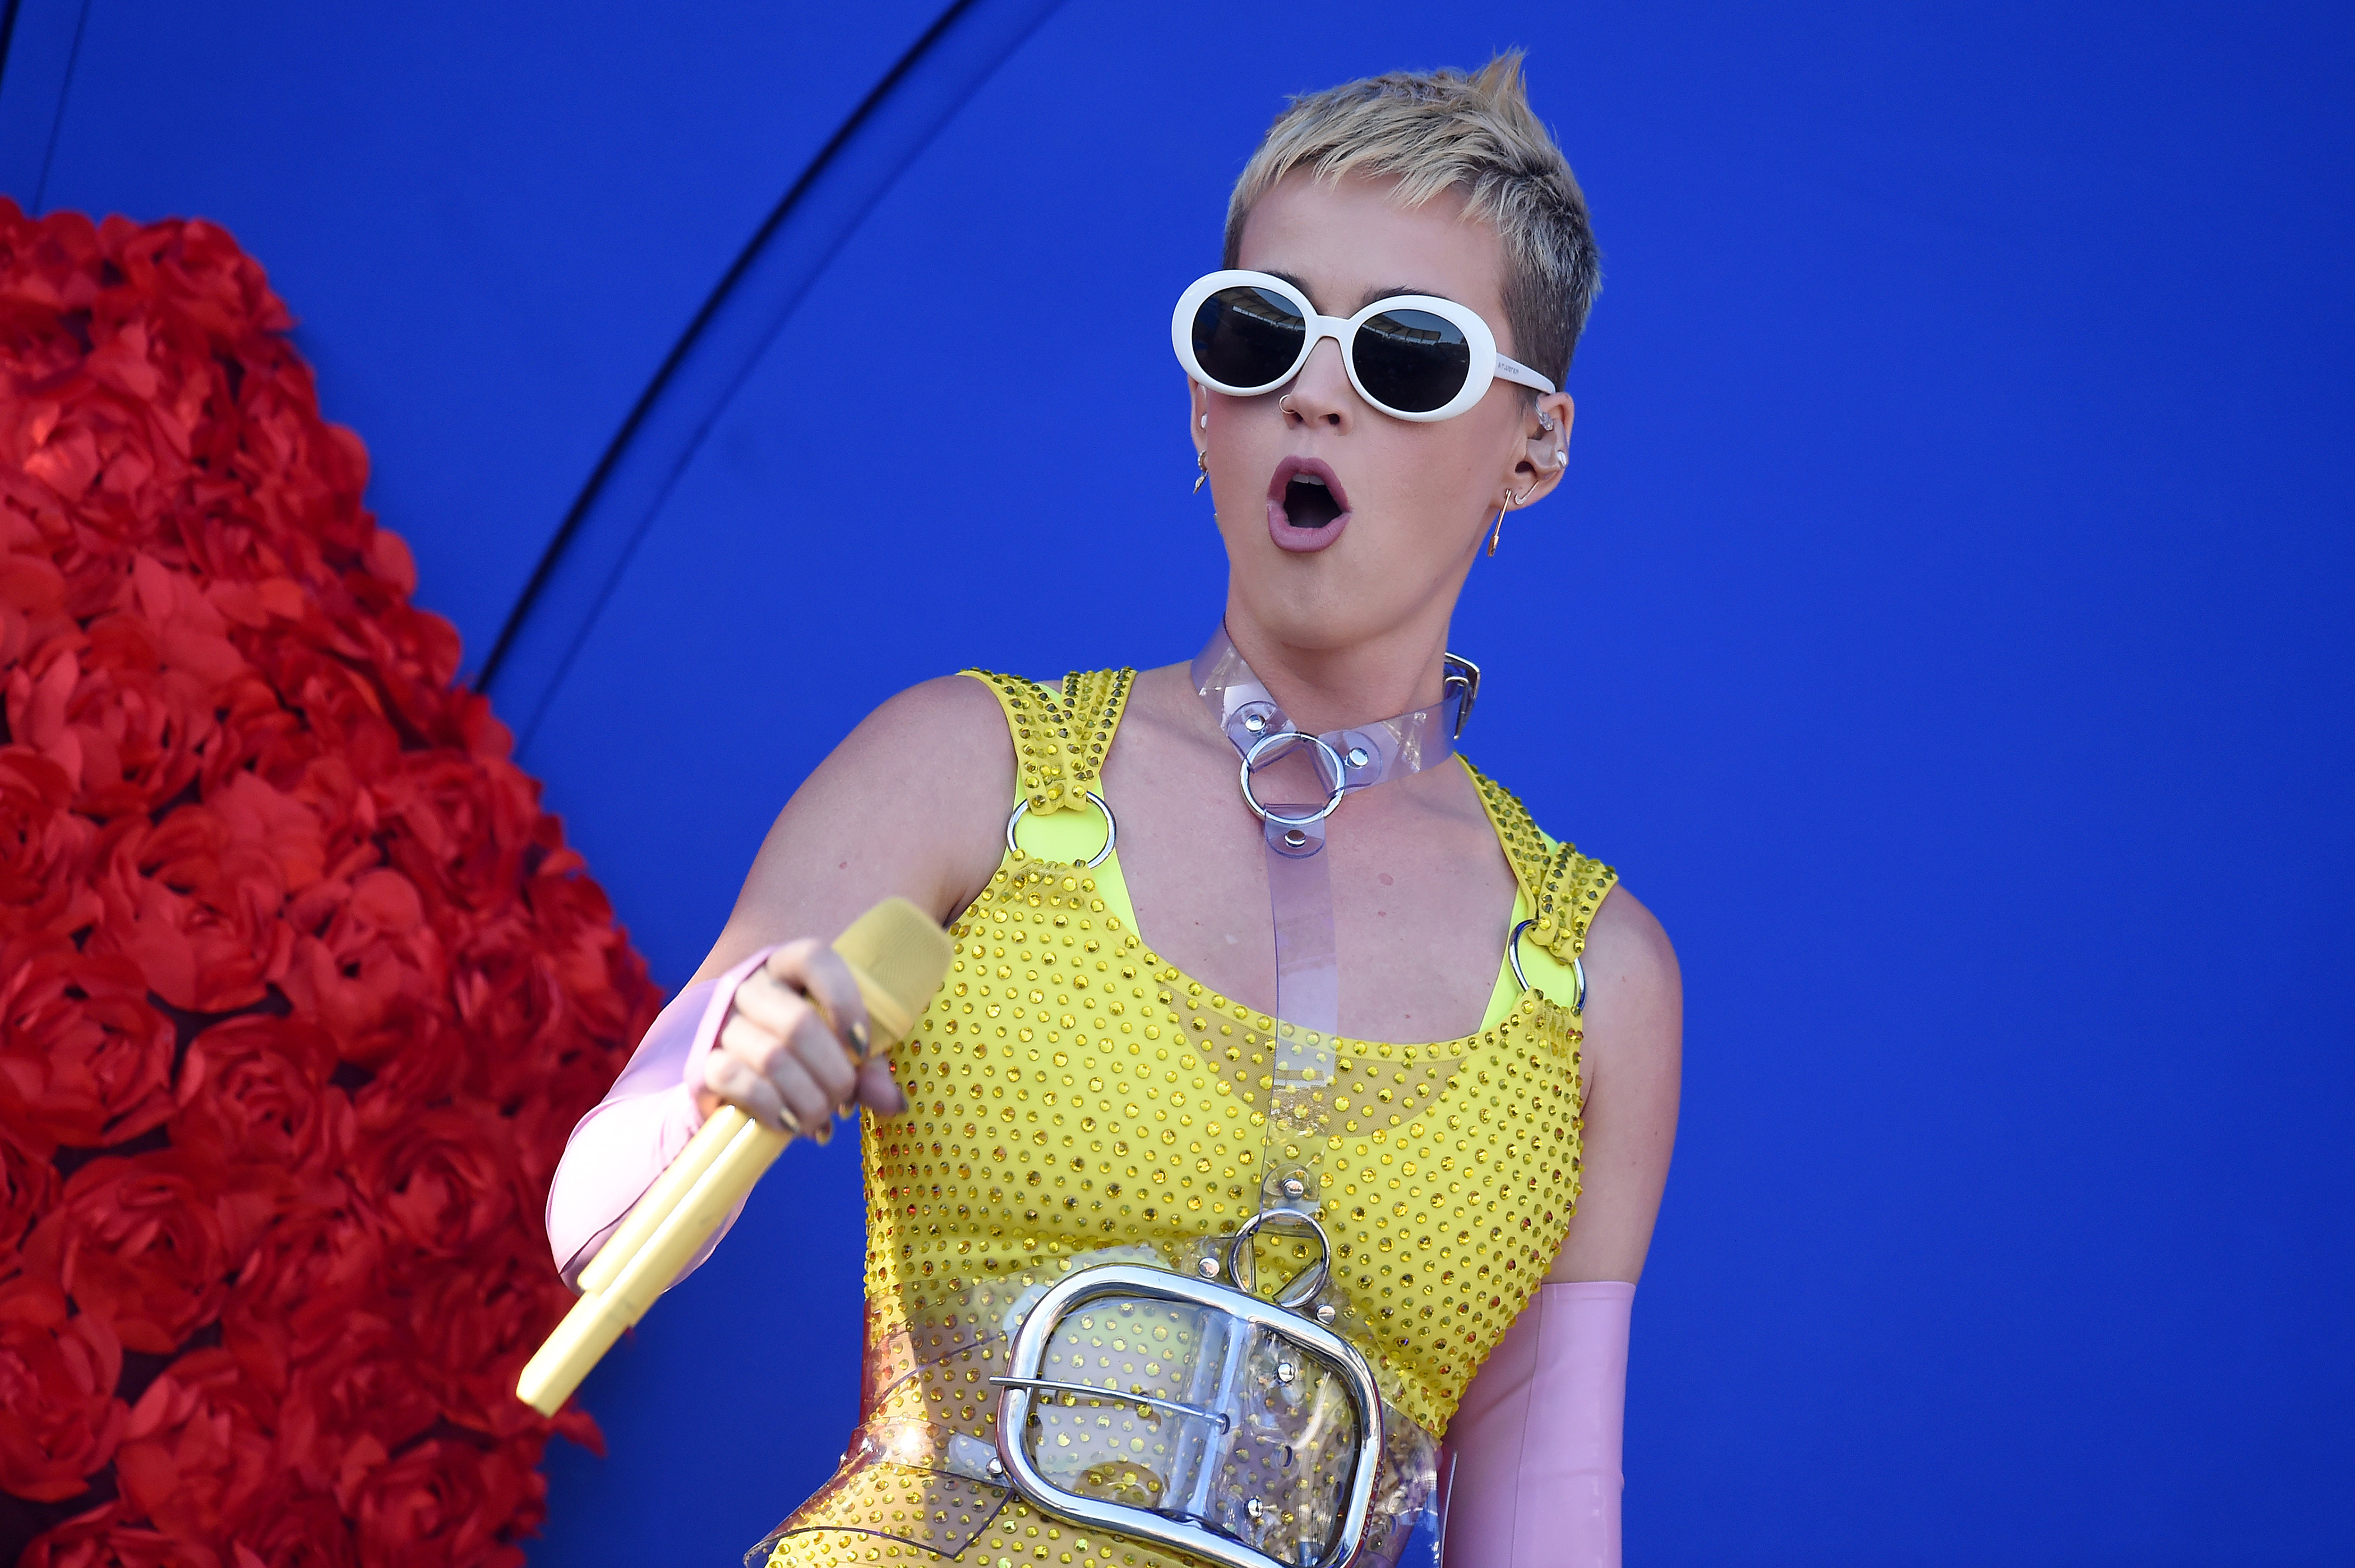 Singer Katy Perry performs in Carson, CA, on May 13, 2017. (Axelle/Bauer-Griffin—FilmMagic/Getty Images)